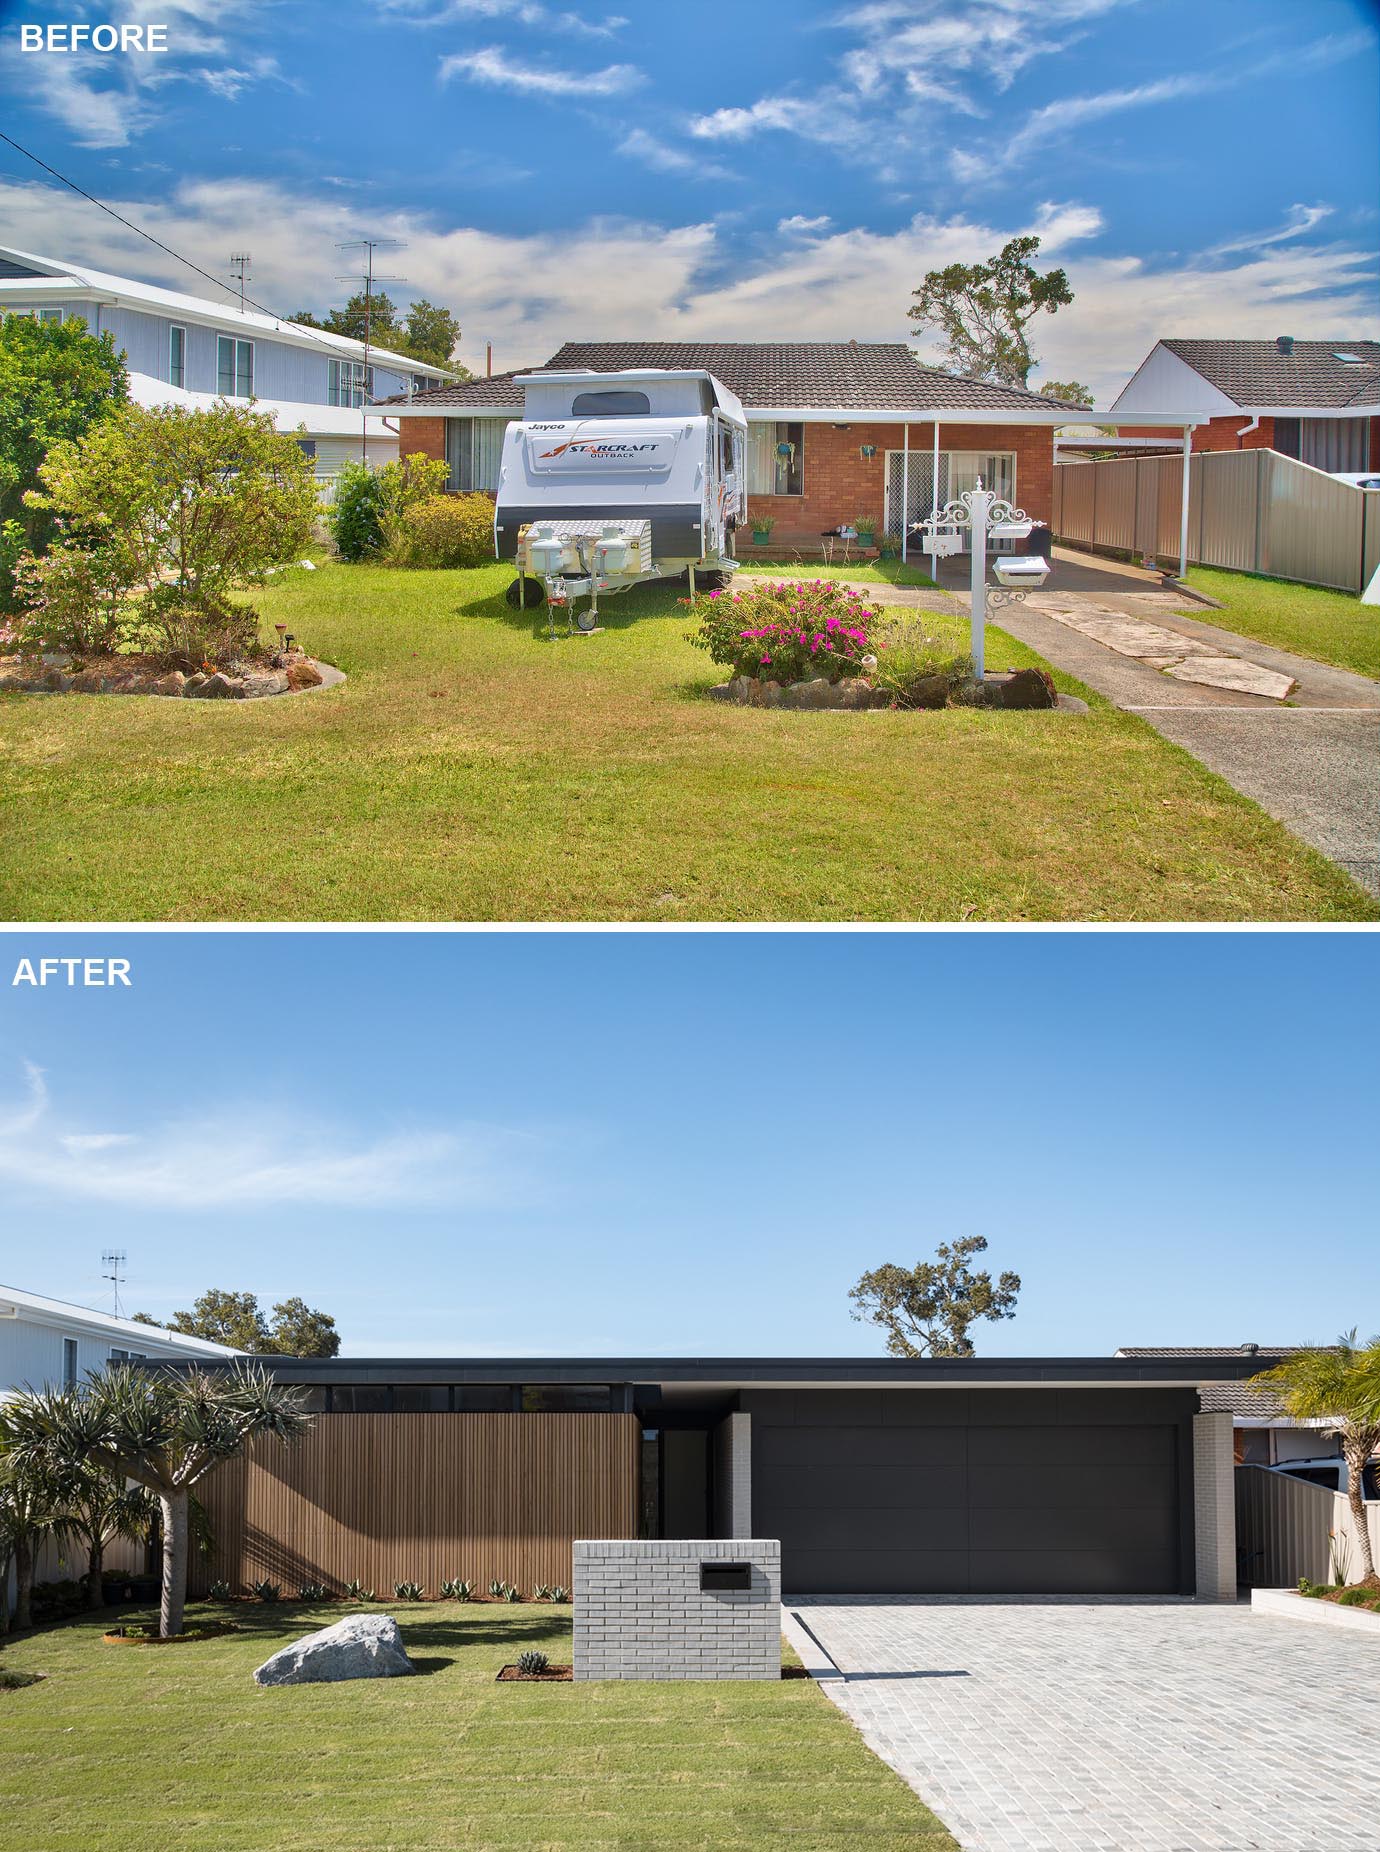 Fabric Architecture have completed the modern remodel of an 70’s red brick Australian classic which had come to the end of its life.